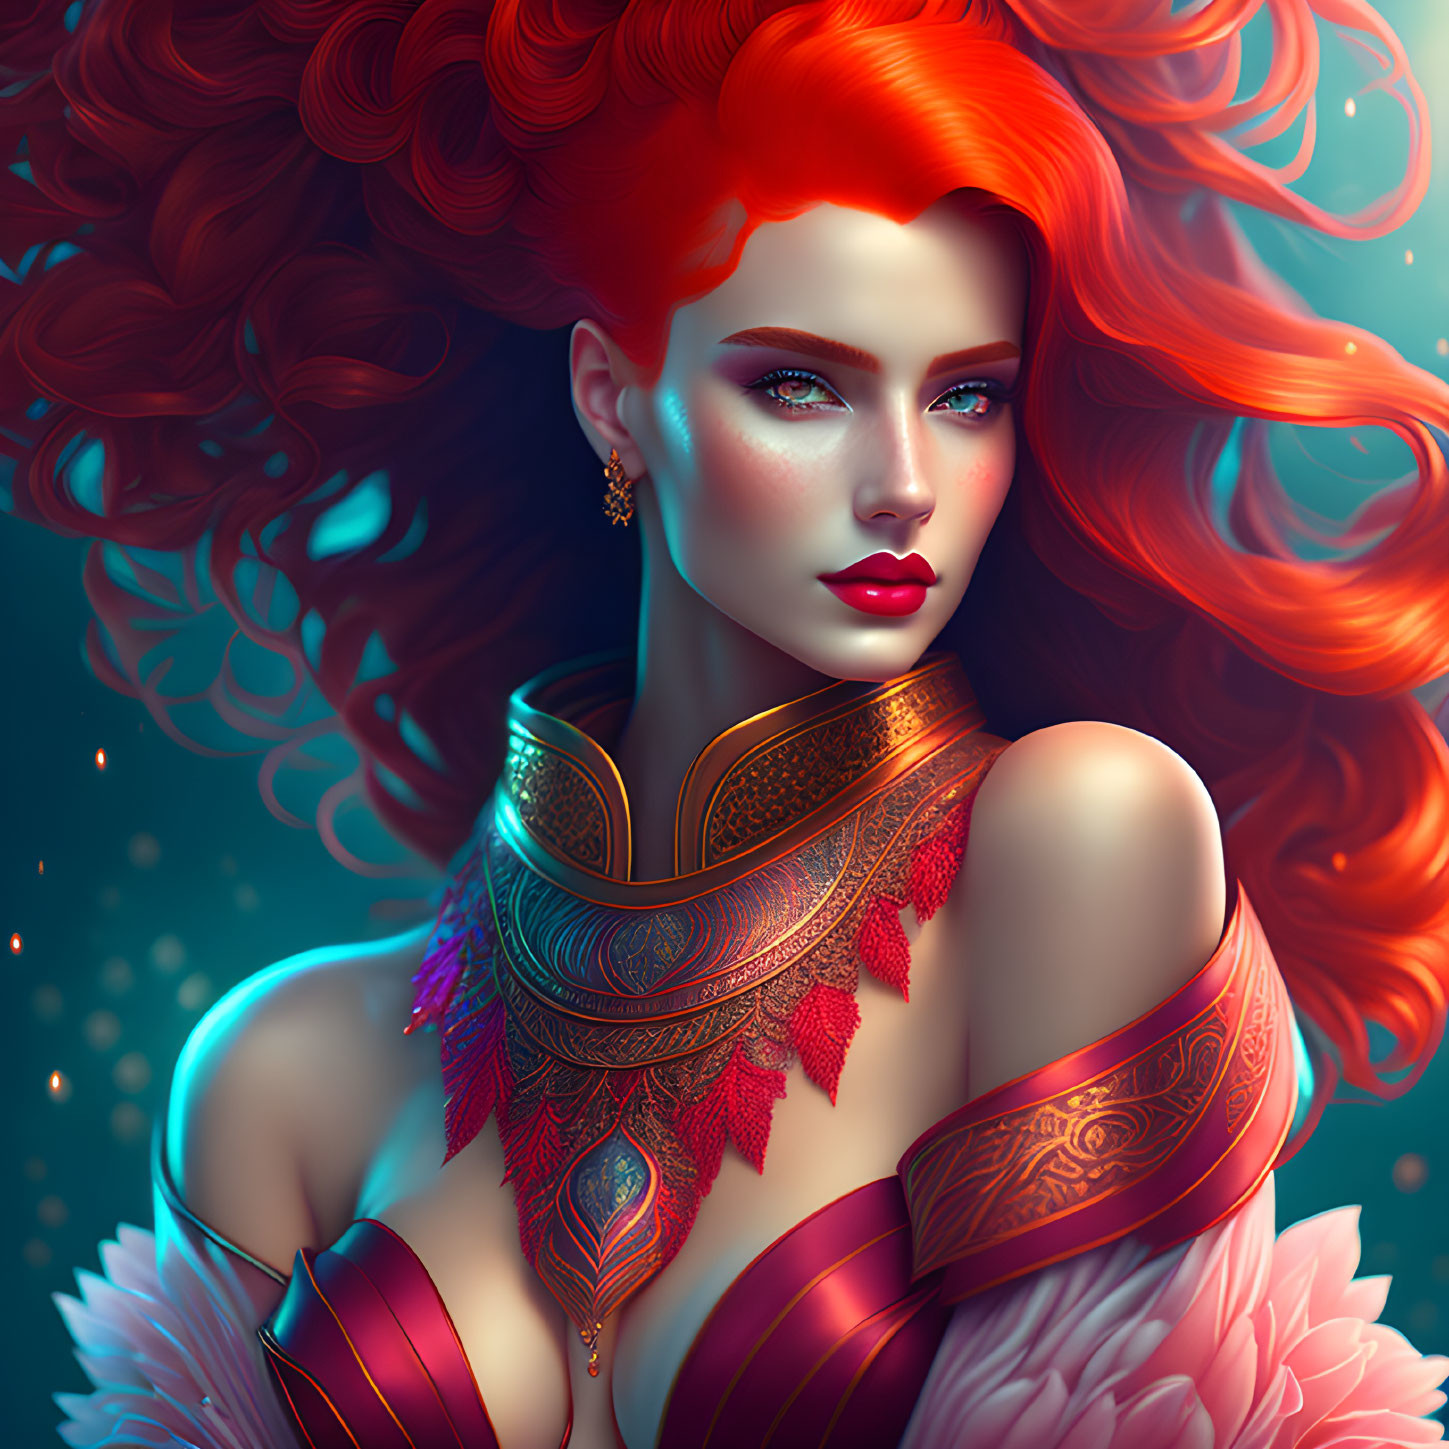 Digital artwork of woman with red hair, blue eyes, golden necklace, red armor, pink feathers